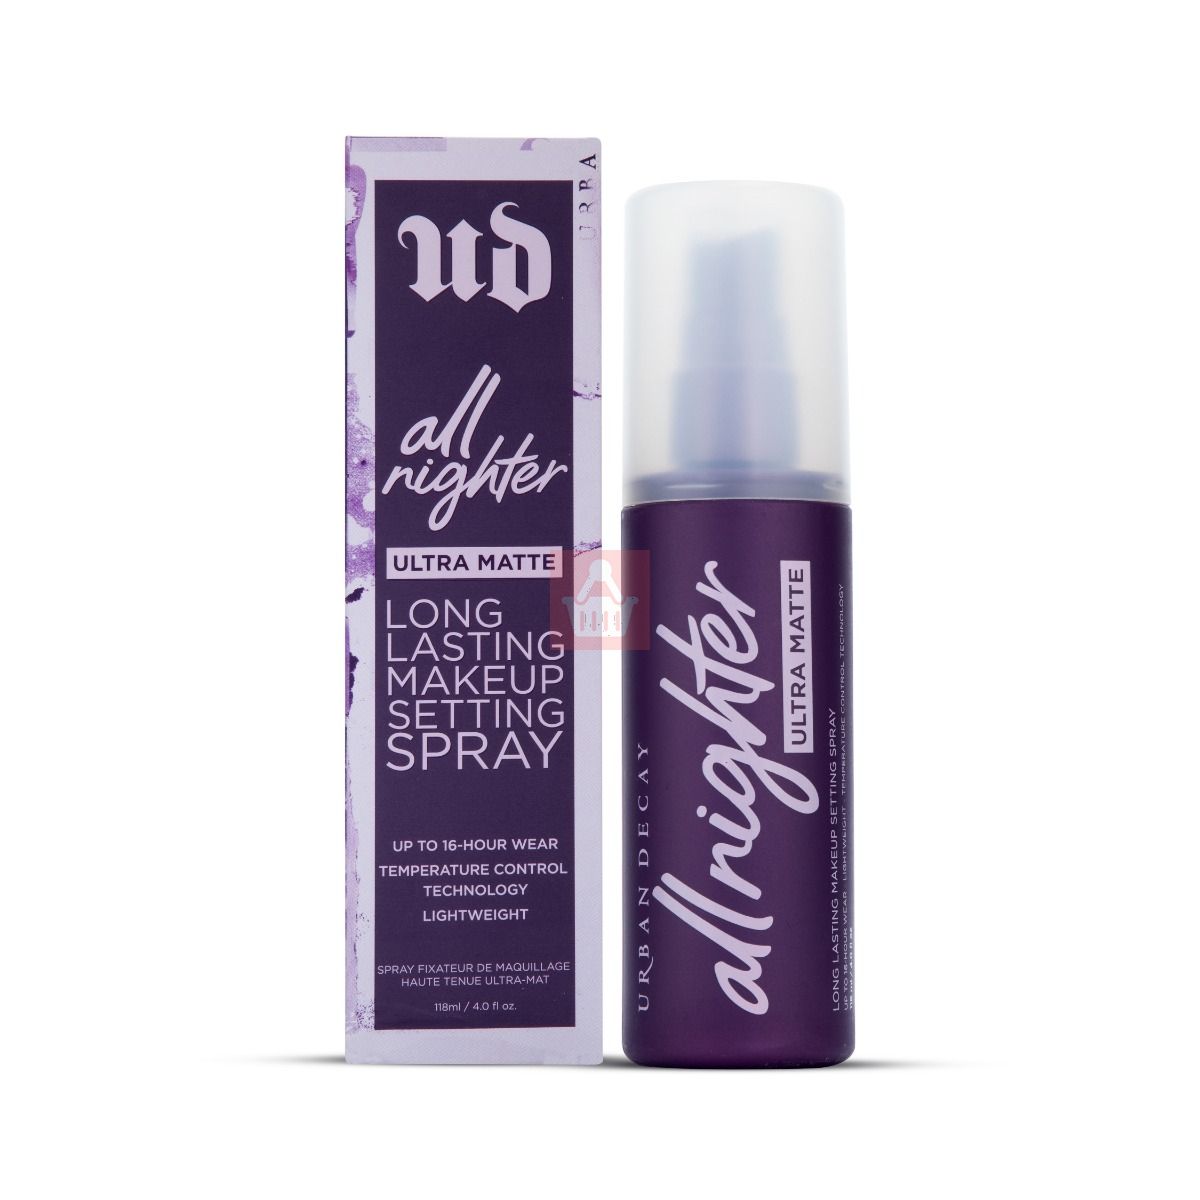 urban decay travel size all nighter ultra matte setting spray